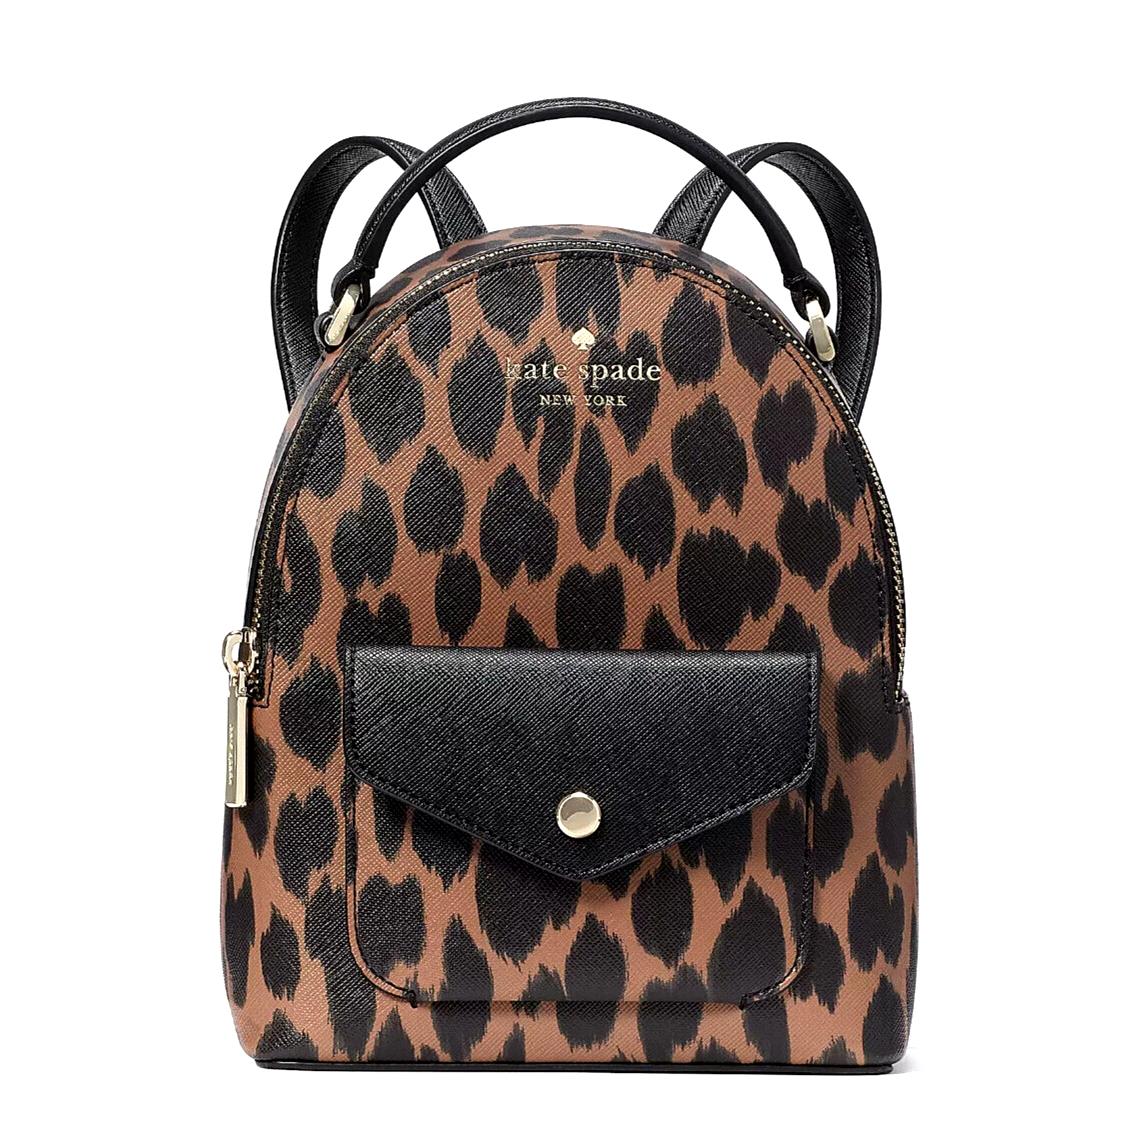 New Kate Spade Schuyler Mini Backpack Leopard Spotted Animal Print with Dust Bag